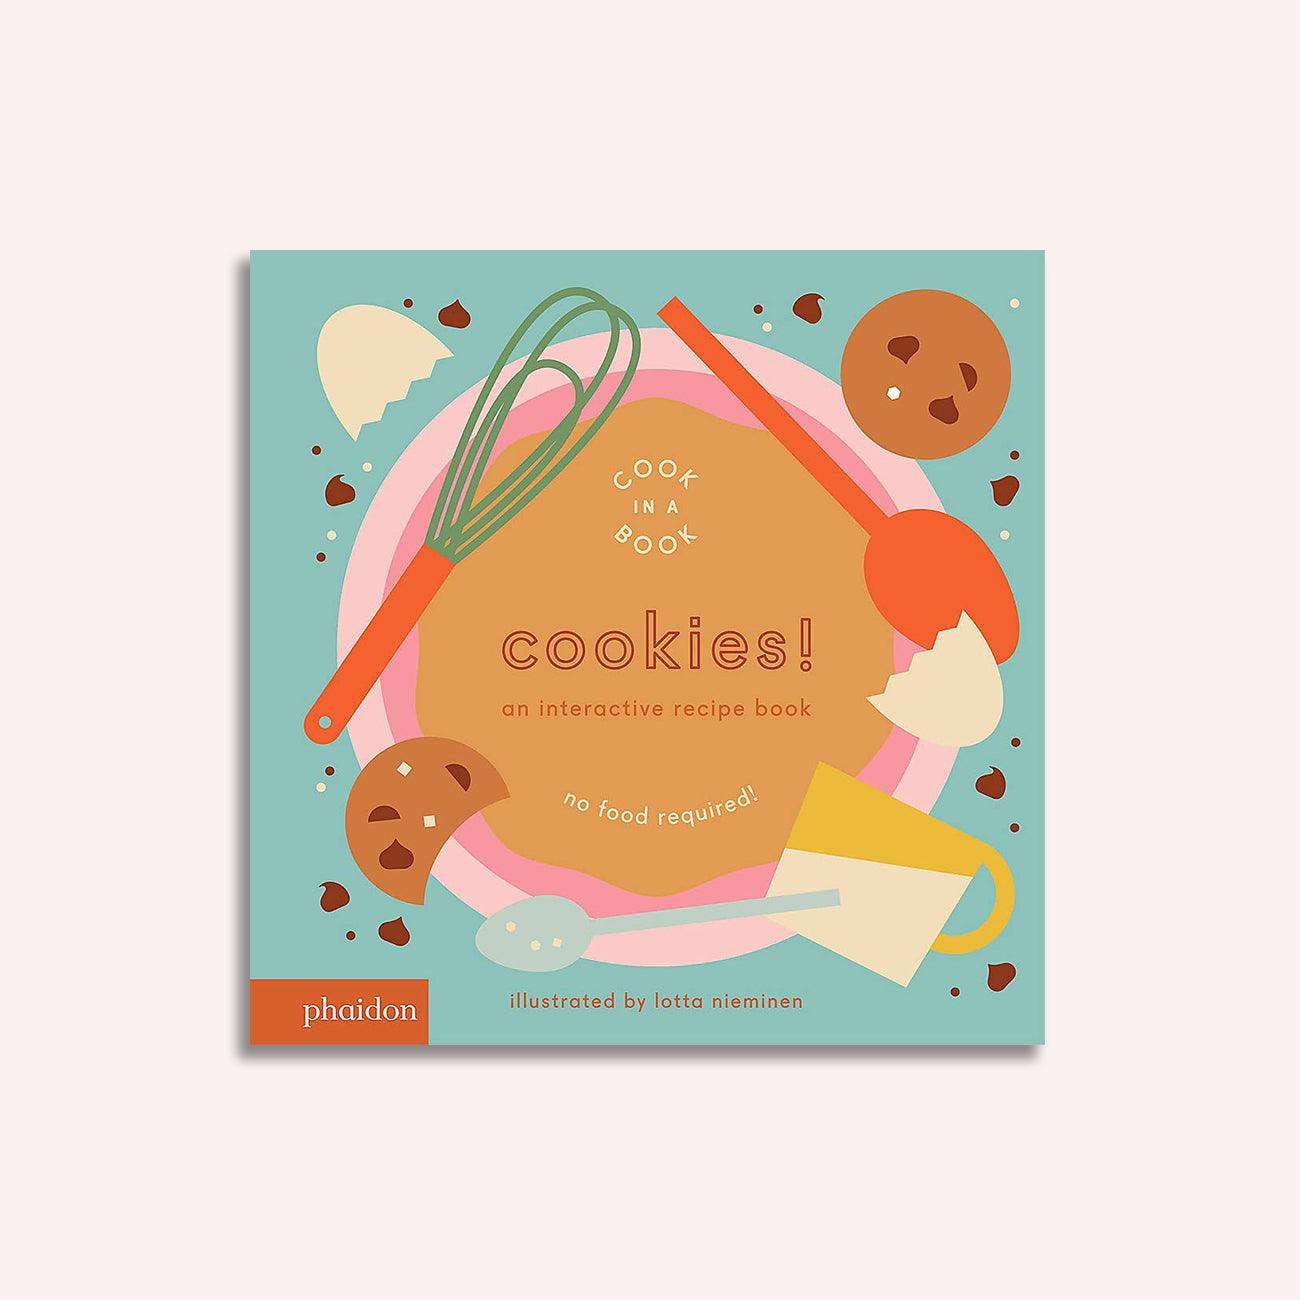 Cook in a book - Cookies